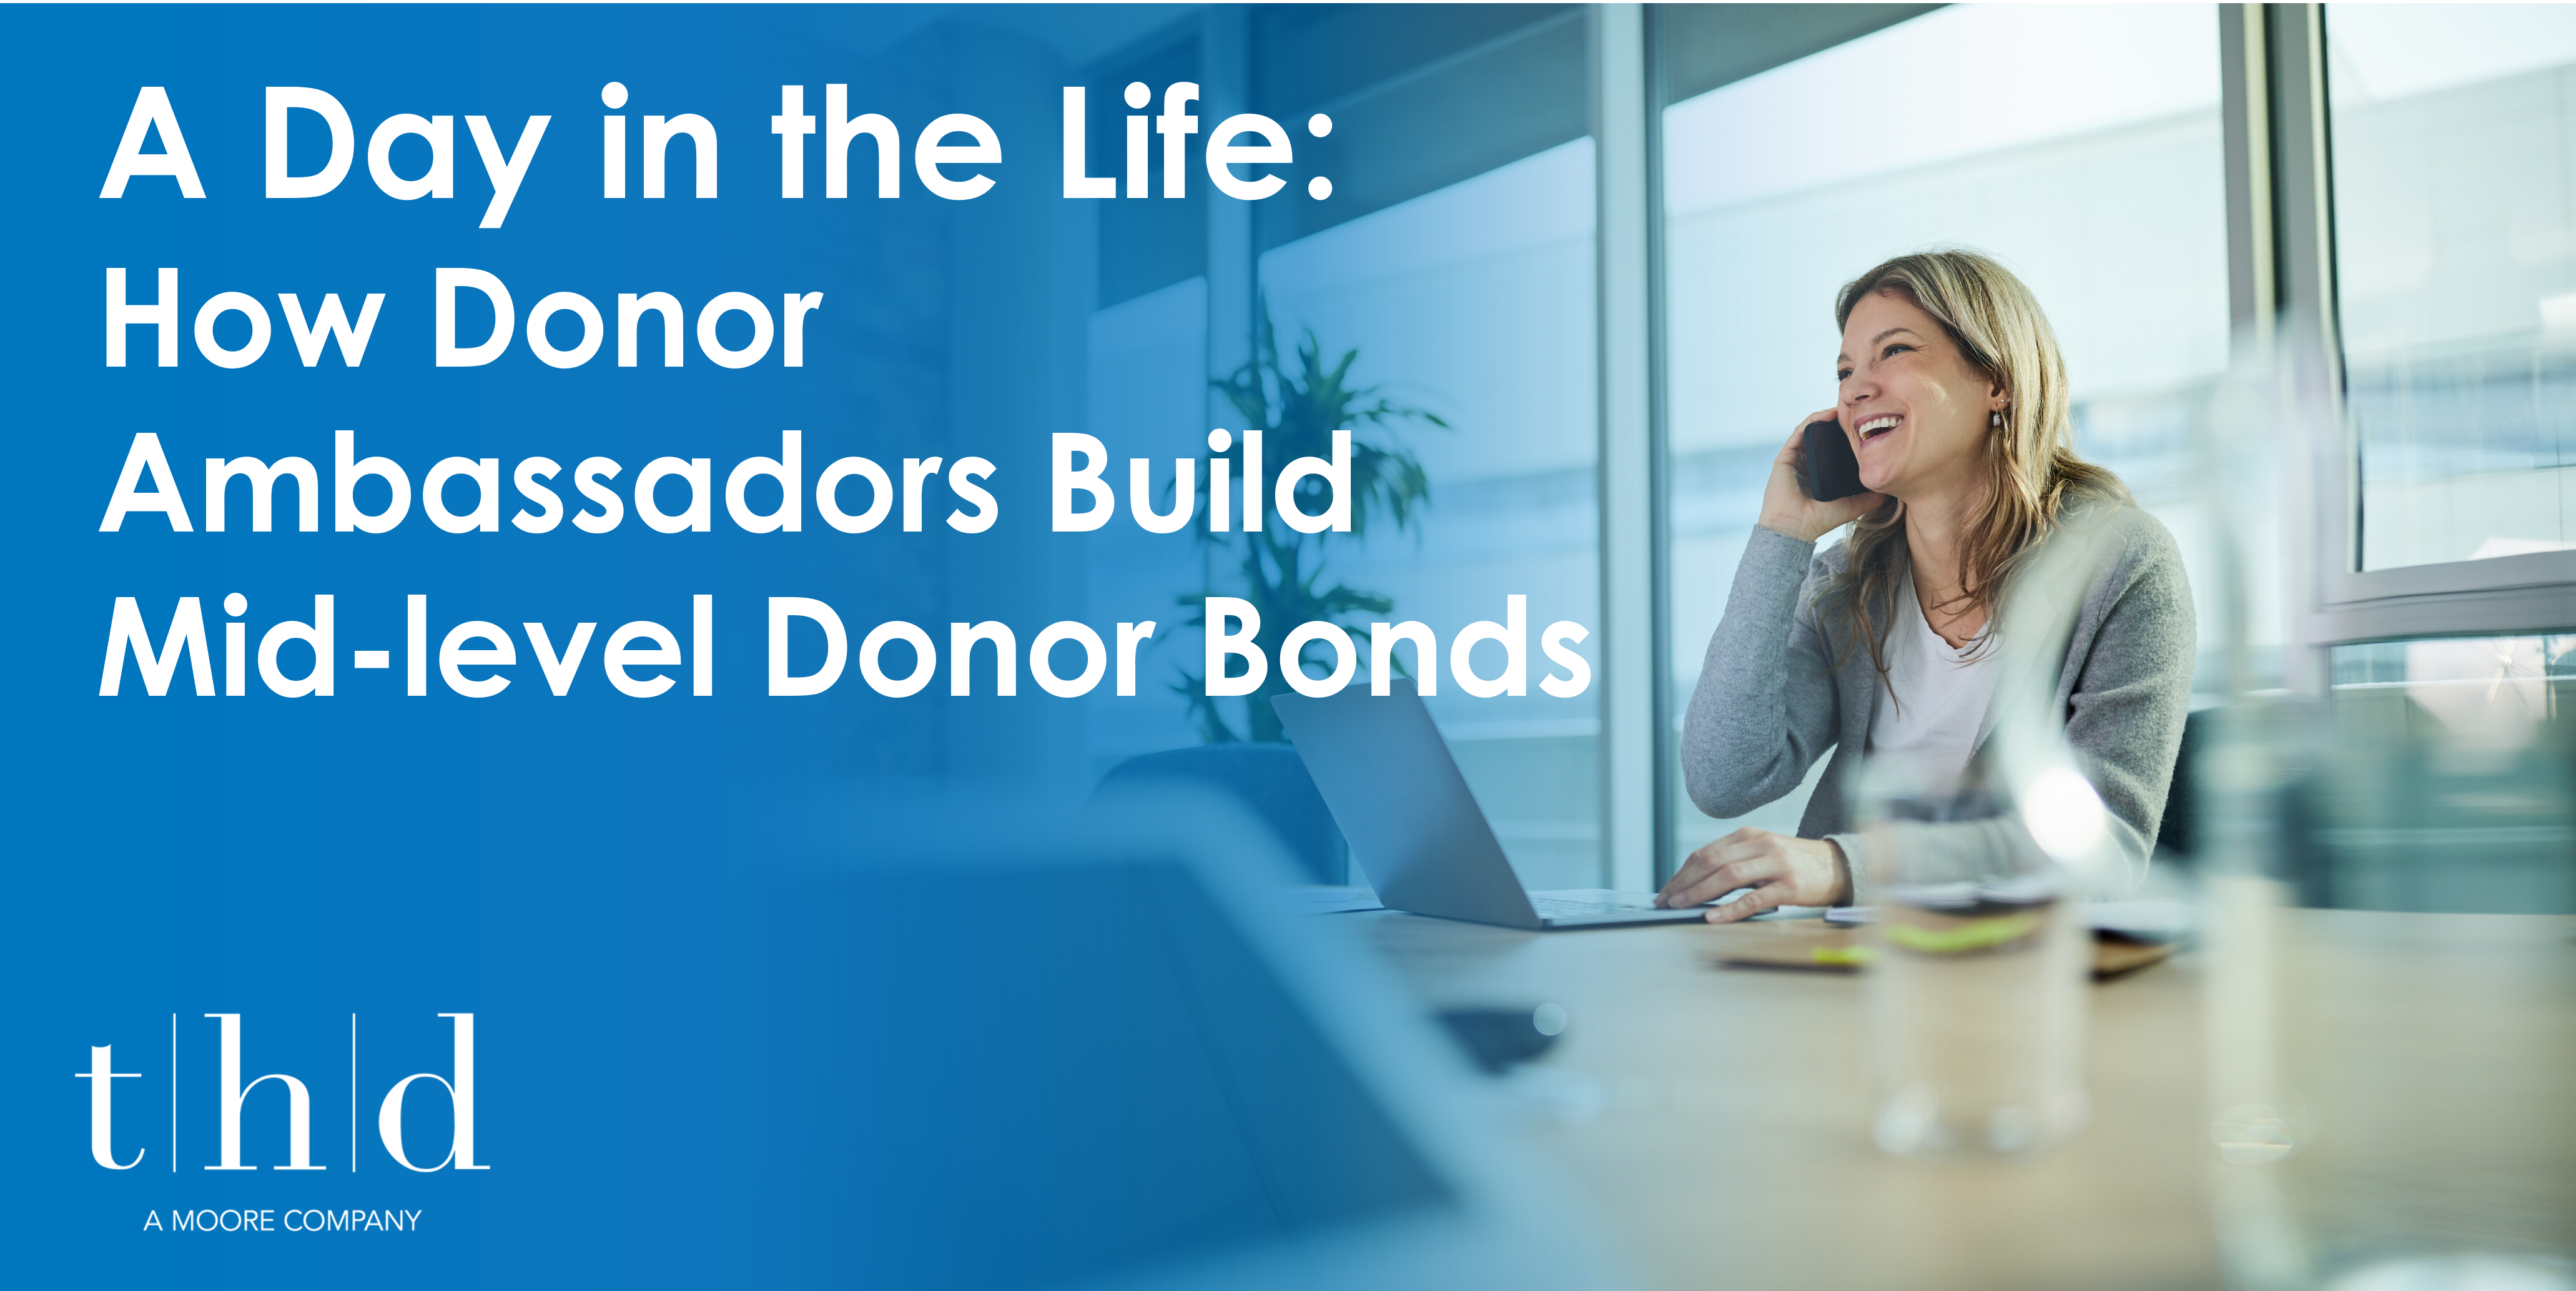 Day in the life of a Donor Ambassador